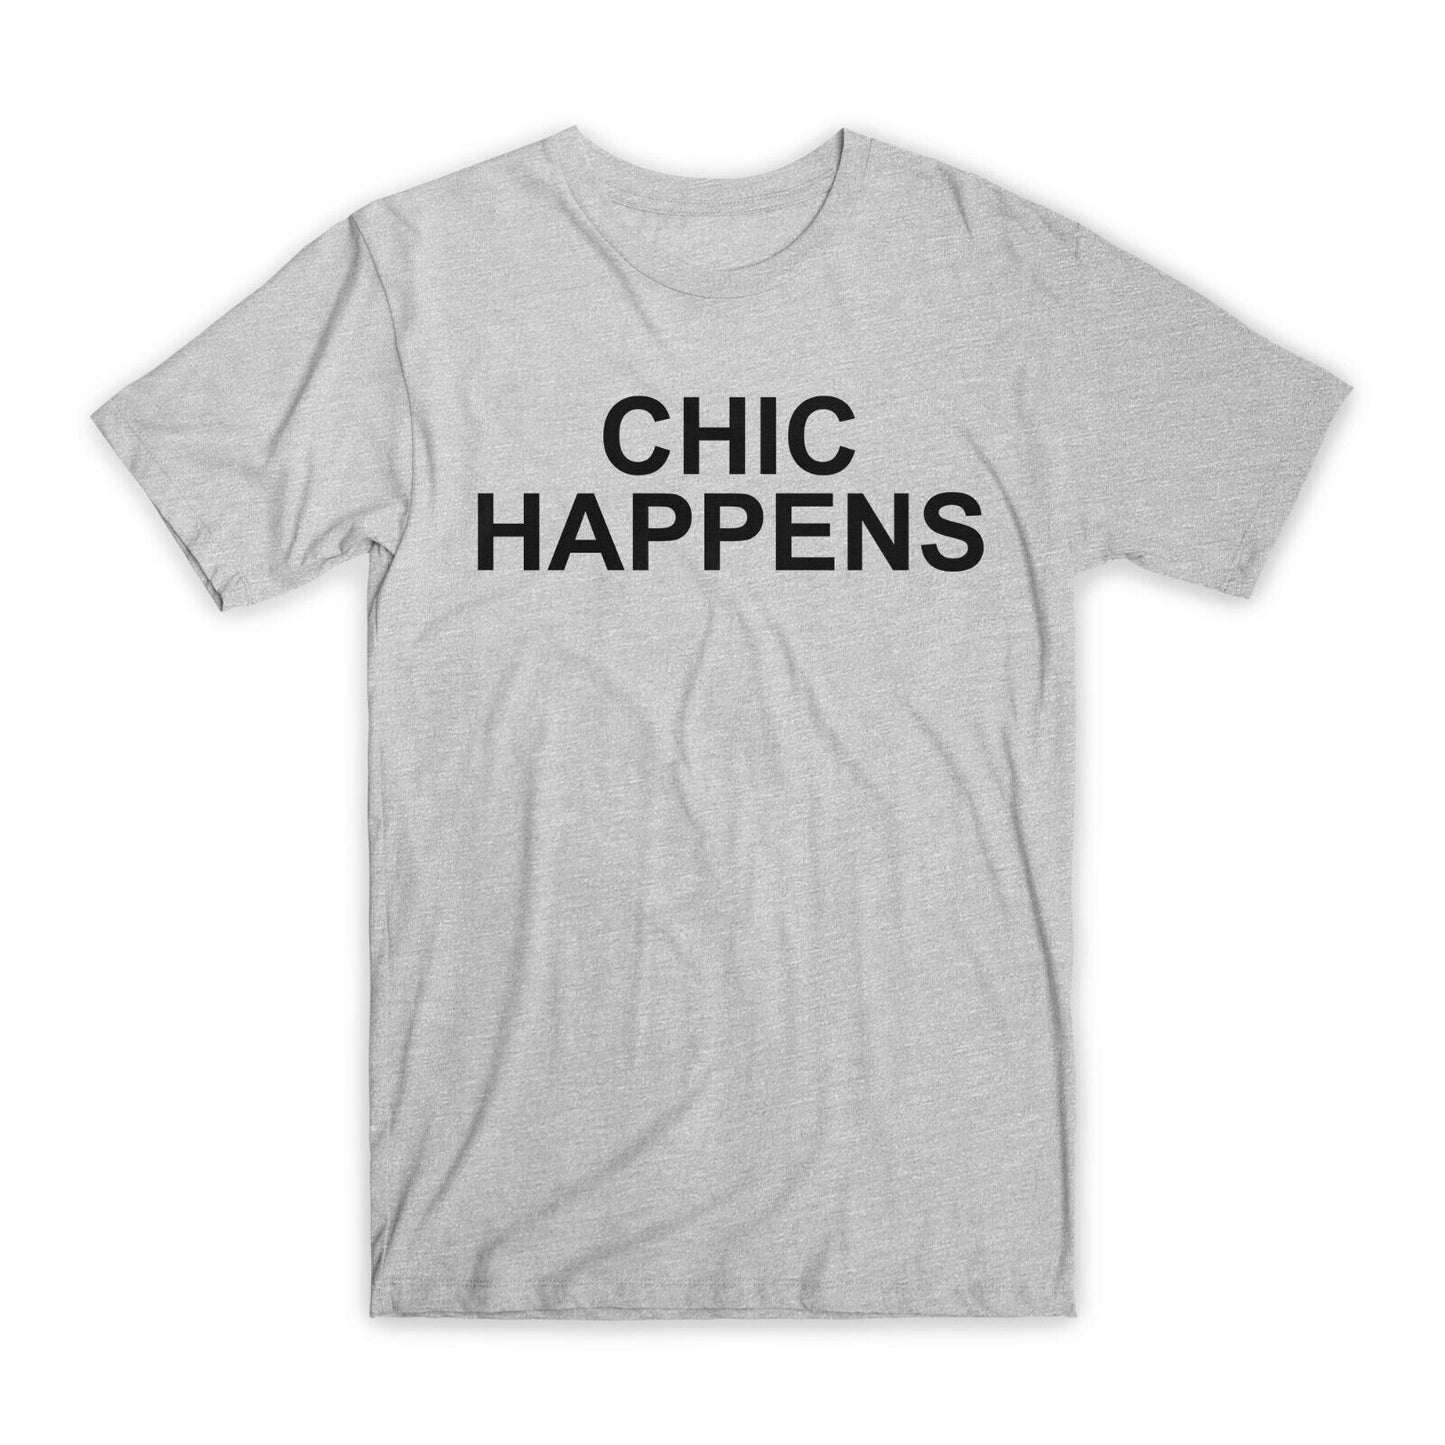 Chic Happens T-Shirt Premium Soft Cotton Crew Neck Funny Tees Novelty Gifts NEW